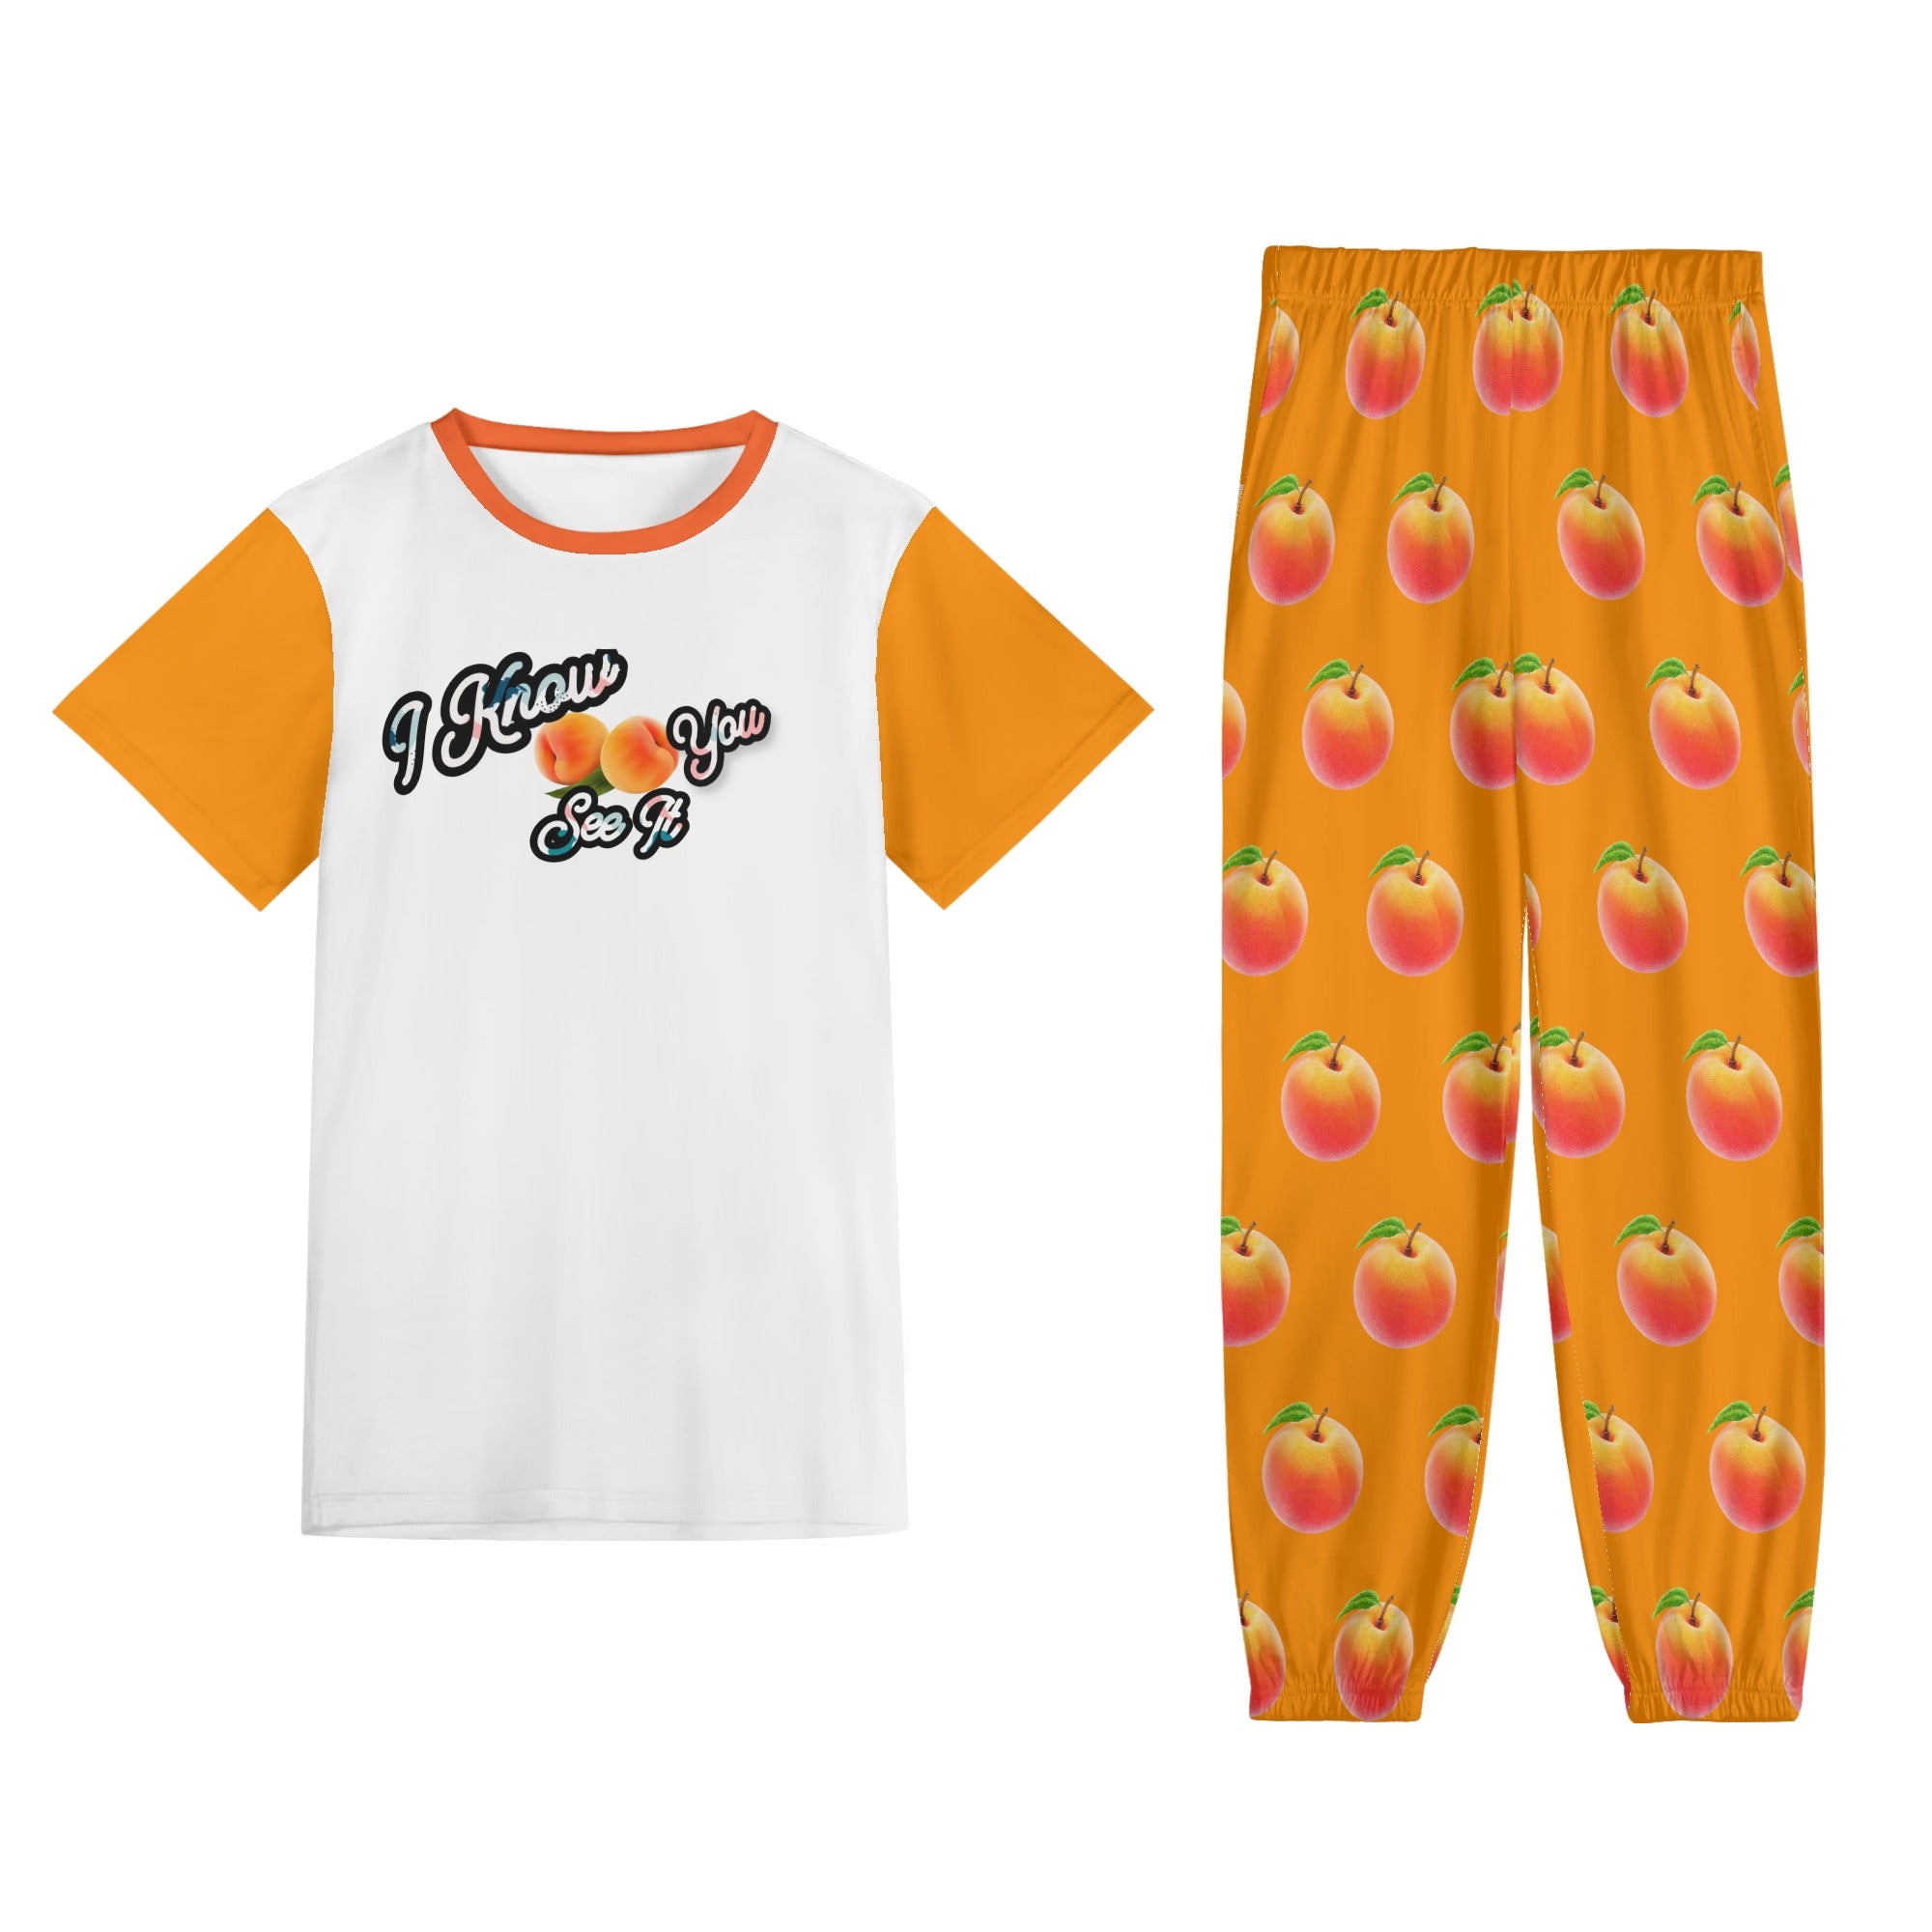 Orange - I Know You See It- Womens Short Sleeve Sports Outfit Set - Womens Pants Sets at TFC&H Co.